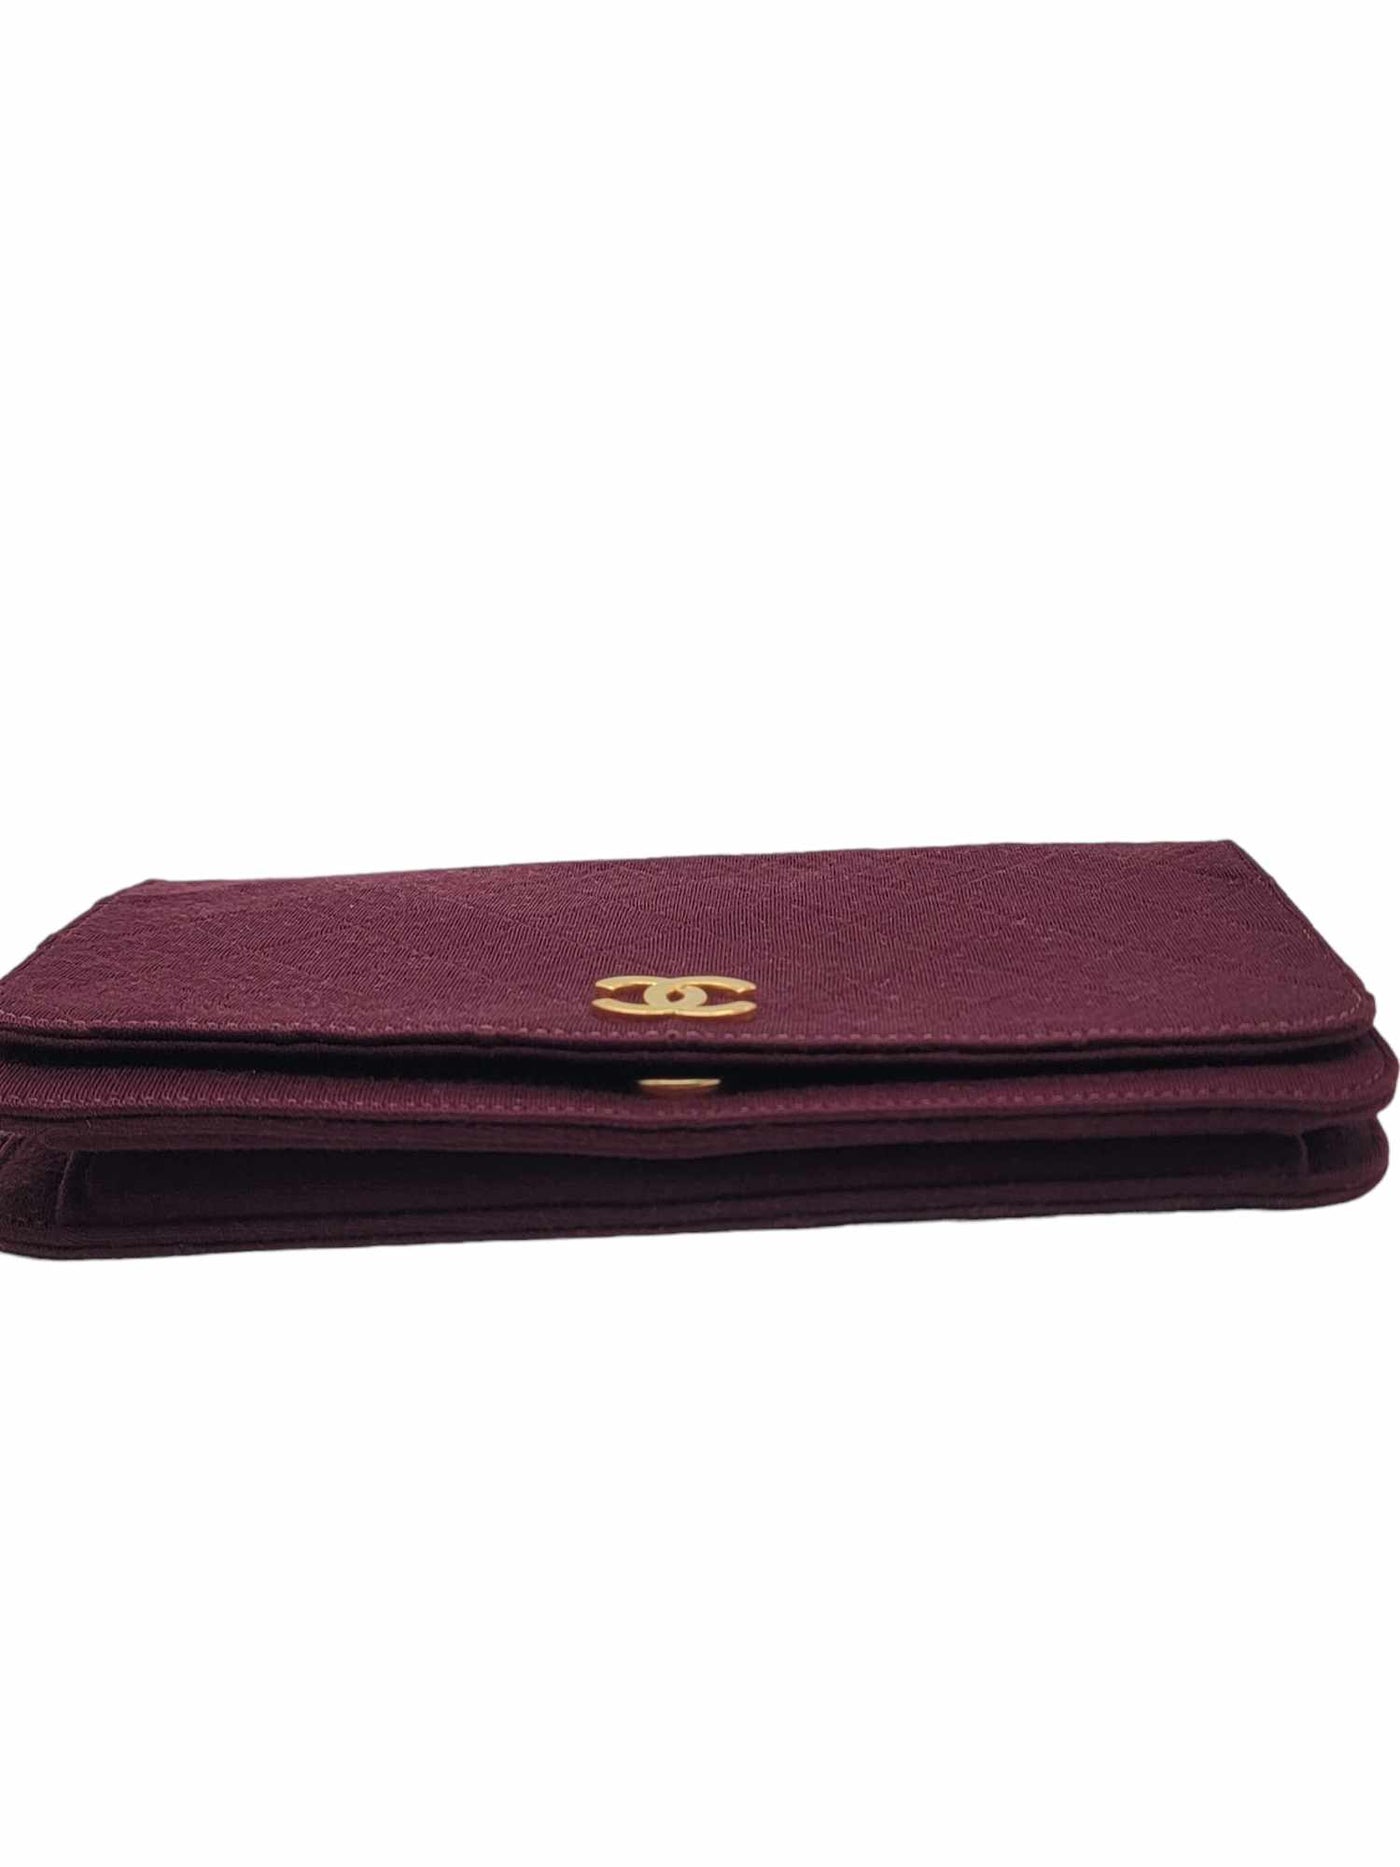 CHANEL Burgundy Quilted Jersey Clutch Bag